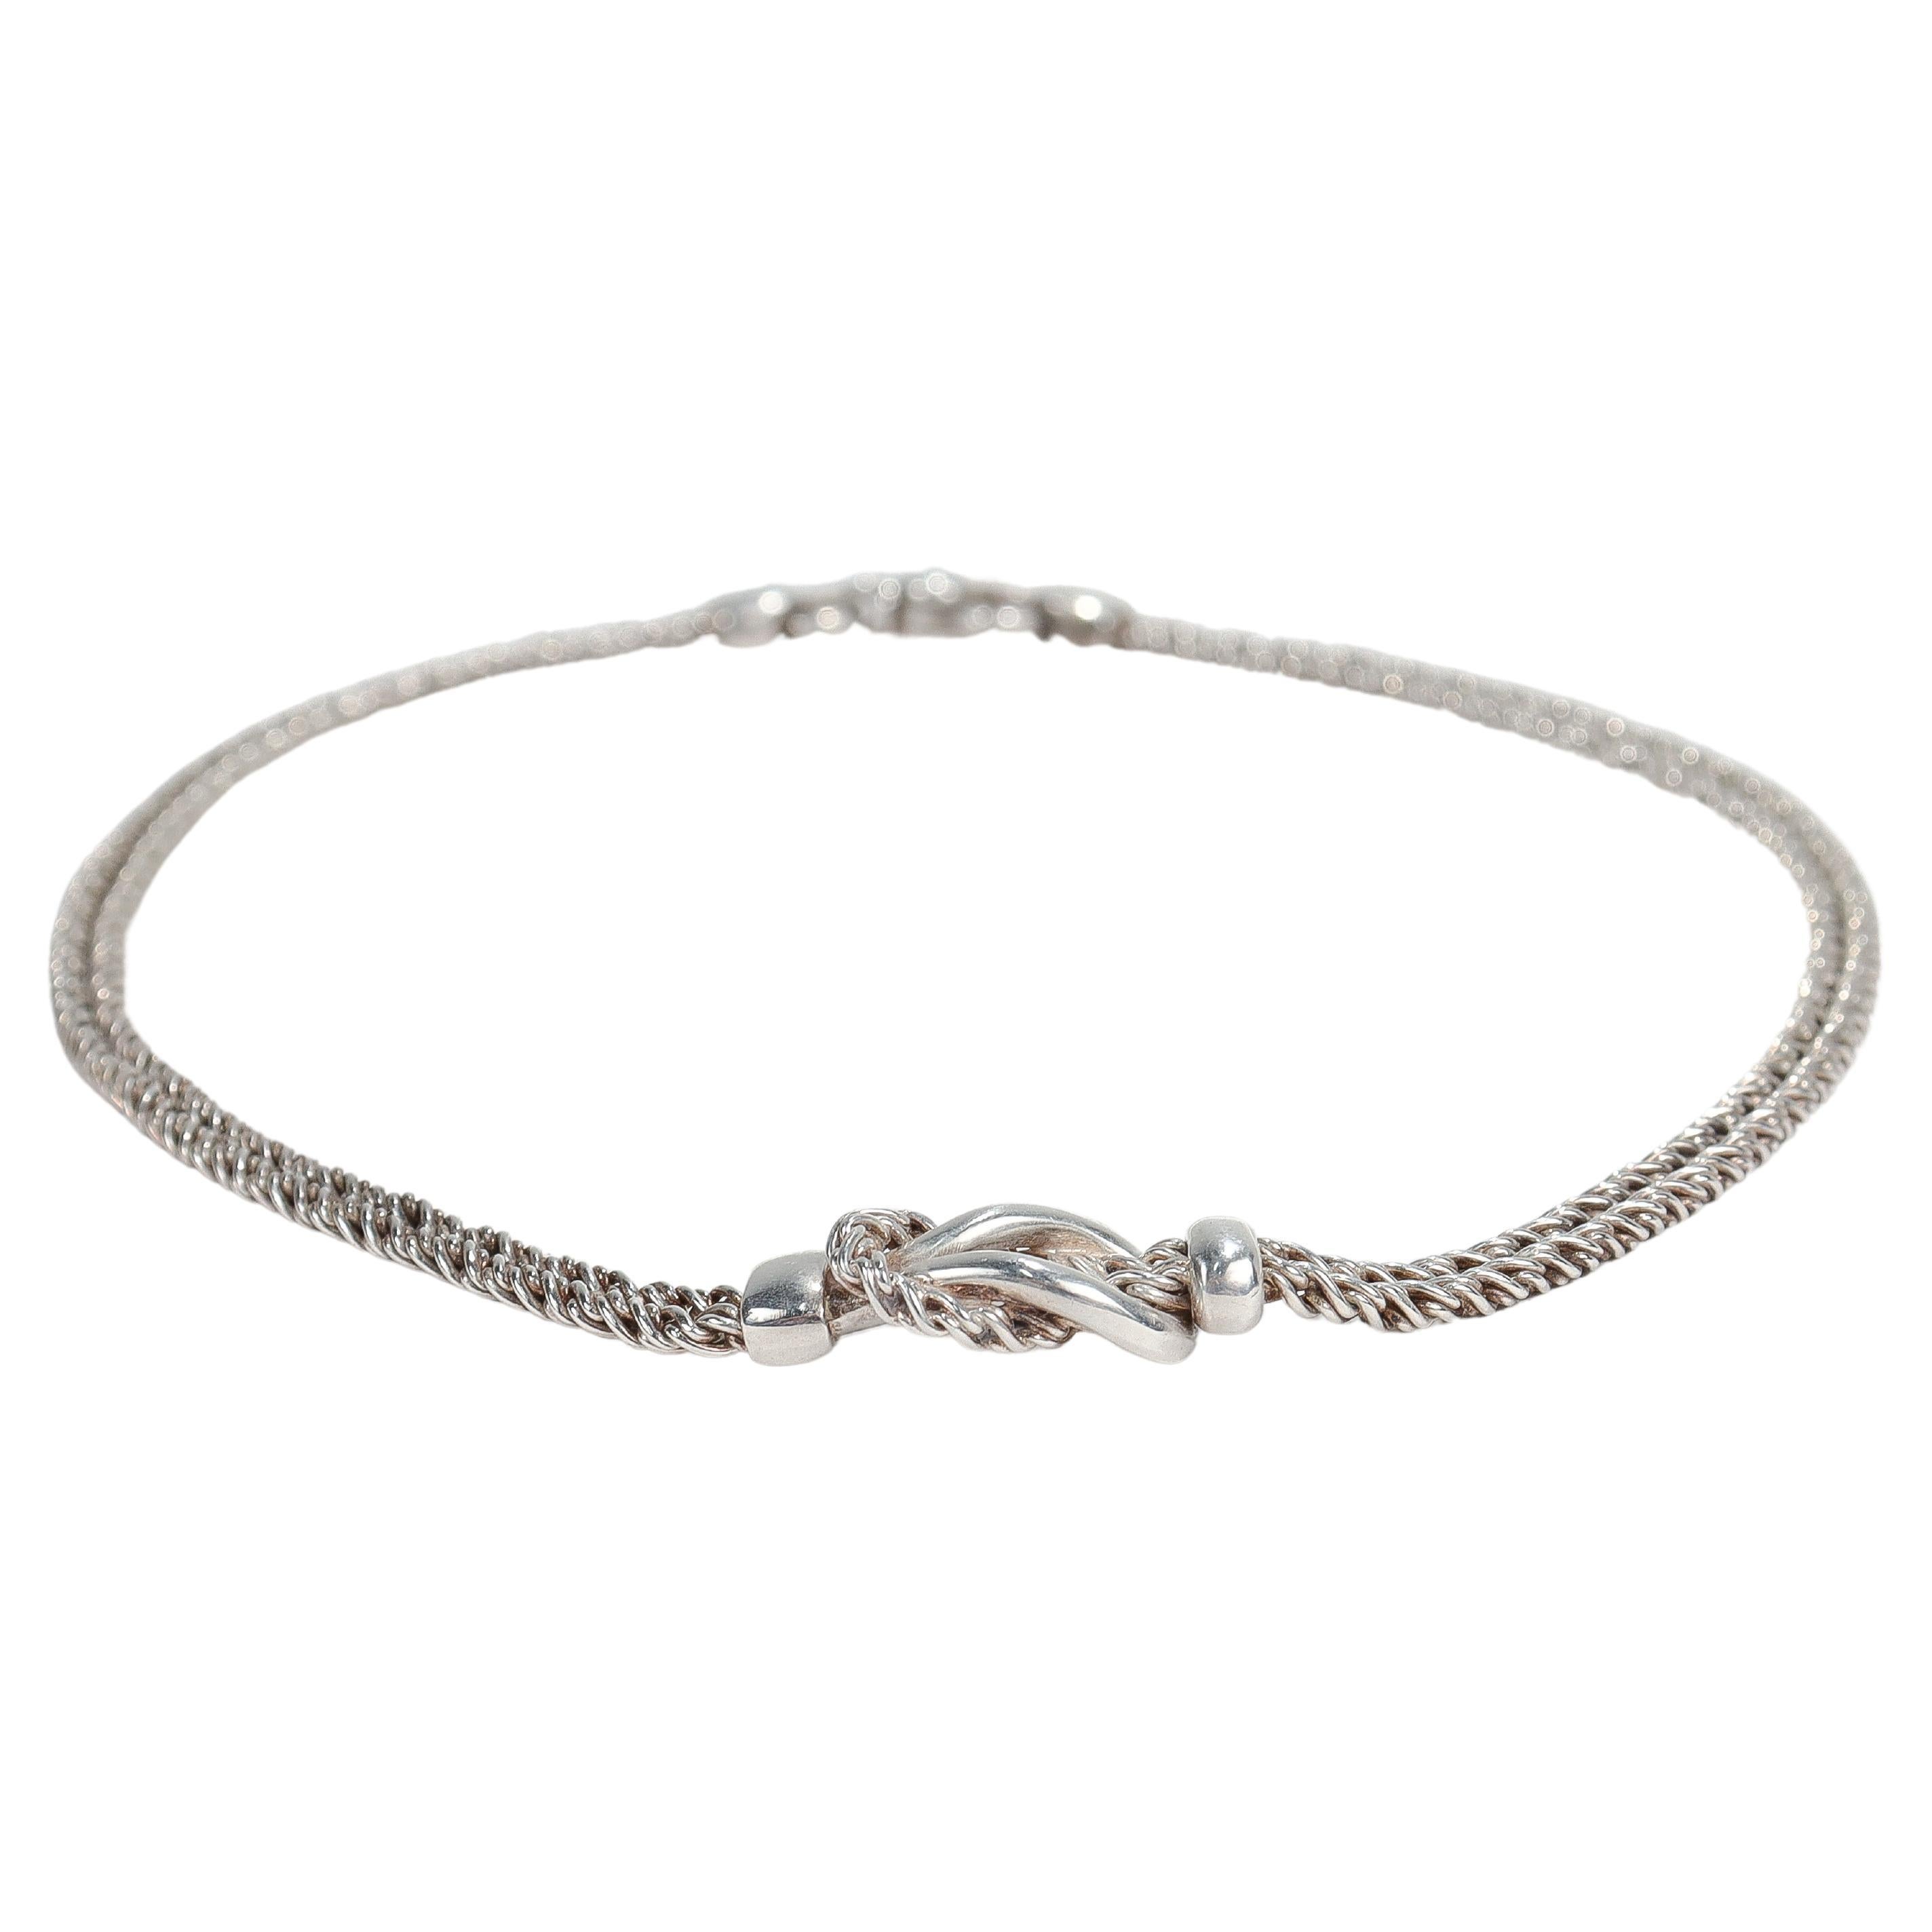 A fine love knot rope chain necklace.

By Tiffany & Co.

In sterling silver.

Comprised of two woven rope chains joined in a double loop love knot at the center of the necklace.

Simply wonderful Tiffany design!

Date:
20th Century

Overall